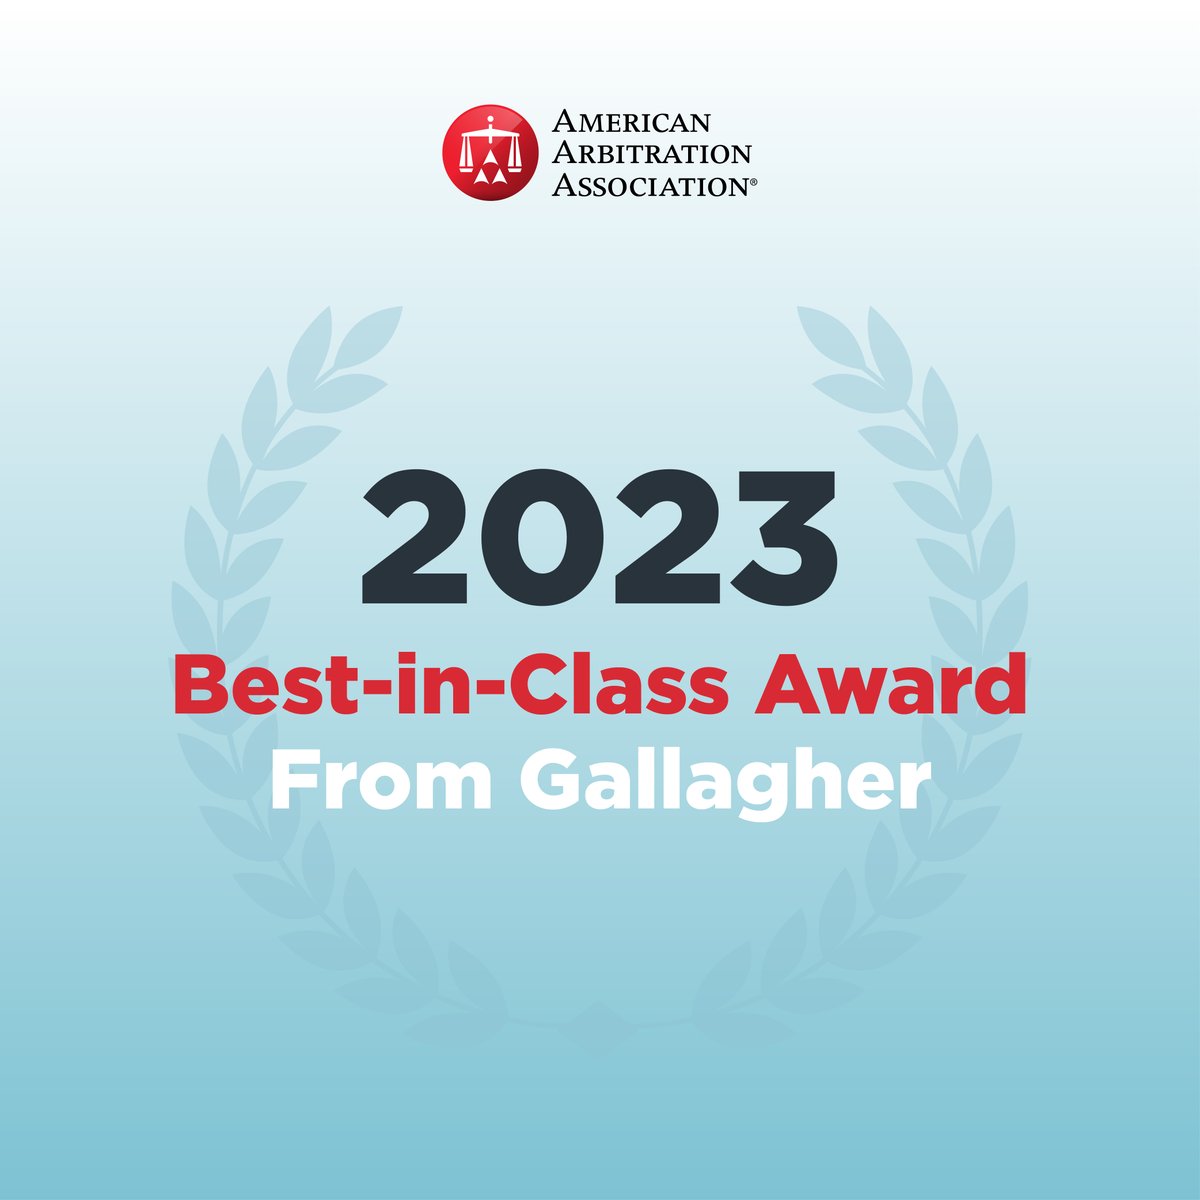 The AAA has been named by Gallagher as a 2023 Best-in-Class Employer. The award honors employers for exemplary support of their employees’ wellbeing. For information about career opportunities at the AAA-ICDR, visit: bit.ly/41yDyBc